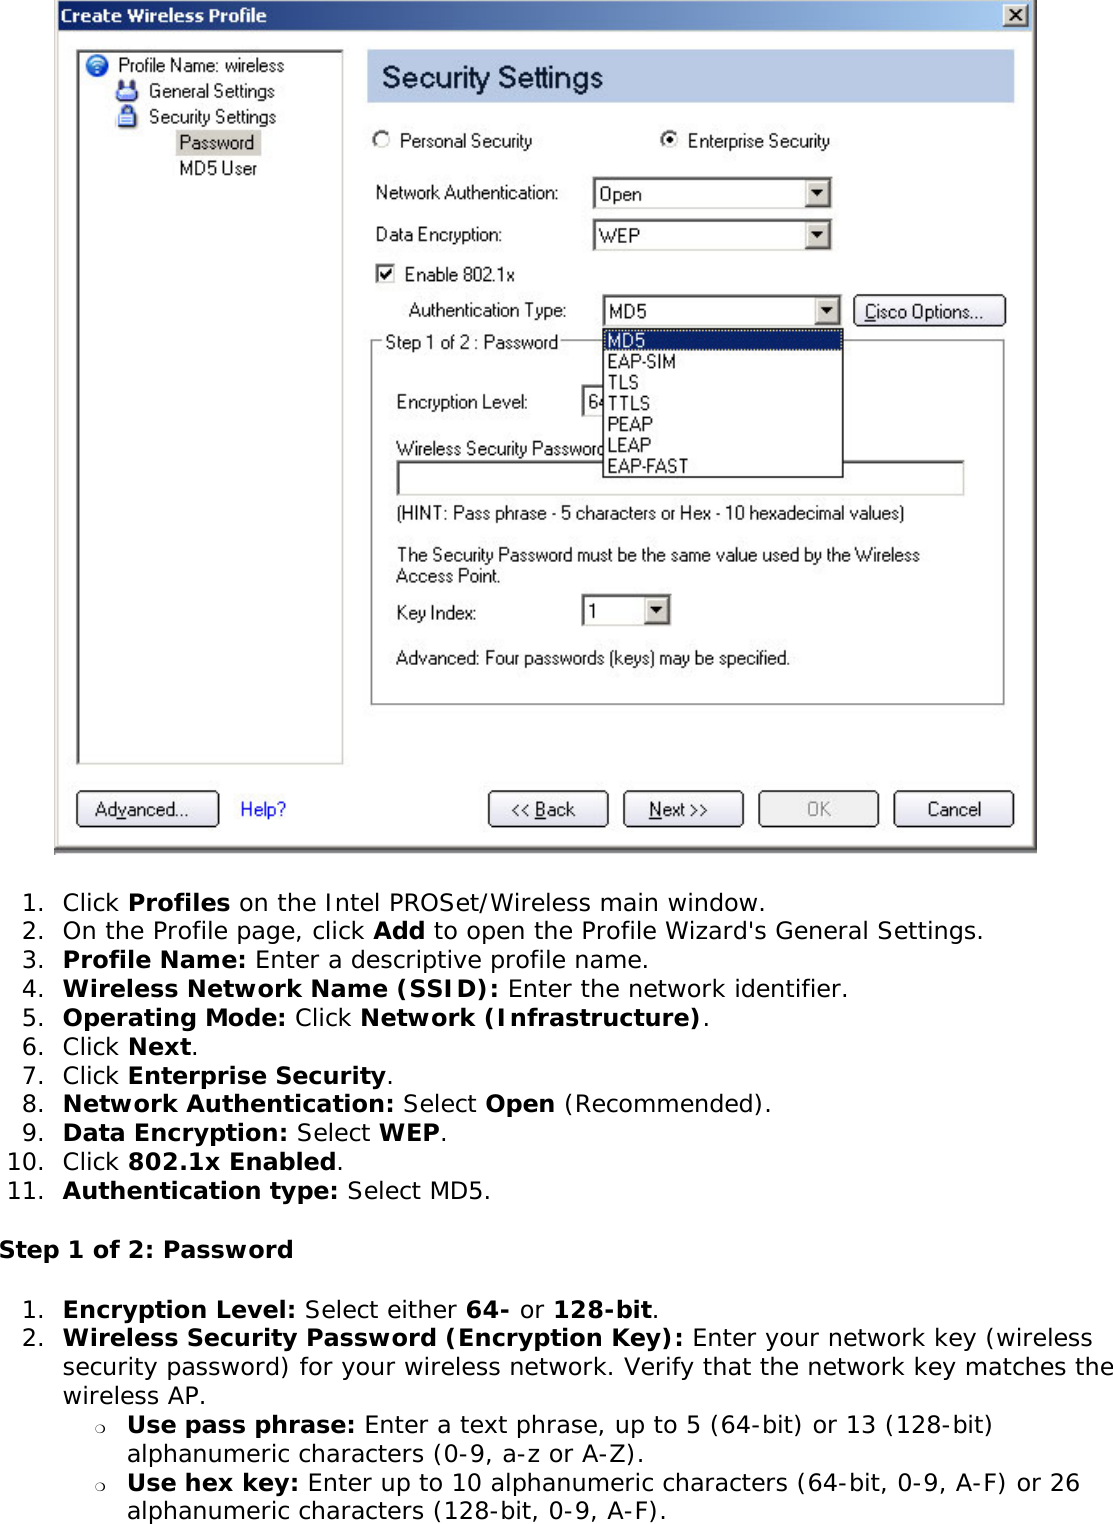  1.  Click Profiles on the Intel PROSet/Wireless main window. 2.  On the Profile page, click Add to open the Profile Wizard&apos;s General Settings.3.  Profile Name: Enter a descriptive profile name.4.  Wireless Network Name (SSID): Enter the network identifier. 5.  Operating Mode: Click Network (Infrastructure). 6.  Click Next.7.  Click Enterprise Security.8.  Network Authentication: Select Open (Recommended). 9.  Data Encryption: Select WEP.10.  Click 802.1x Enabled.11.  Authentication type: Select MD5.Step 1 of 2: Password 1.  Encryption Level: Select either 64- or 128-bit.2.  Wireless Security Password (Encryption Key): Enter your network key (wireless security password) for your wireless network. Verify that the network key matches the wireless AP. ❍     Use pass phrase: Enter a text phrase, up to 5 (64-bit) or 13 (128-bit) alphanumeric characters (0-9, a-z or A-Z).❍     Use hex key: Enter up to 10 alphanumeric characters (64-bit, 0-9, A-F) or 26 alphanumeric characters (128-bit, 0-9, A-F).